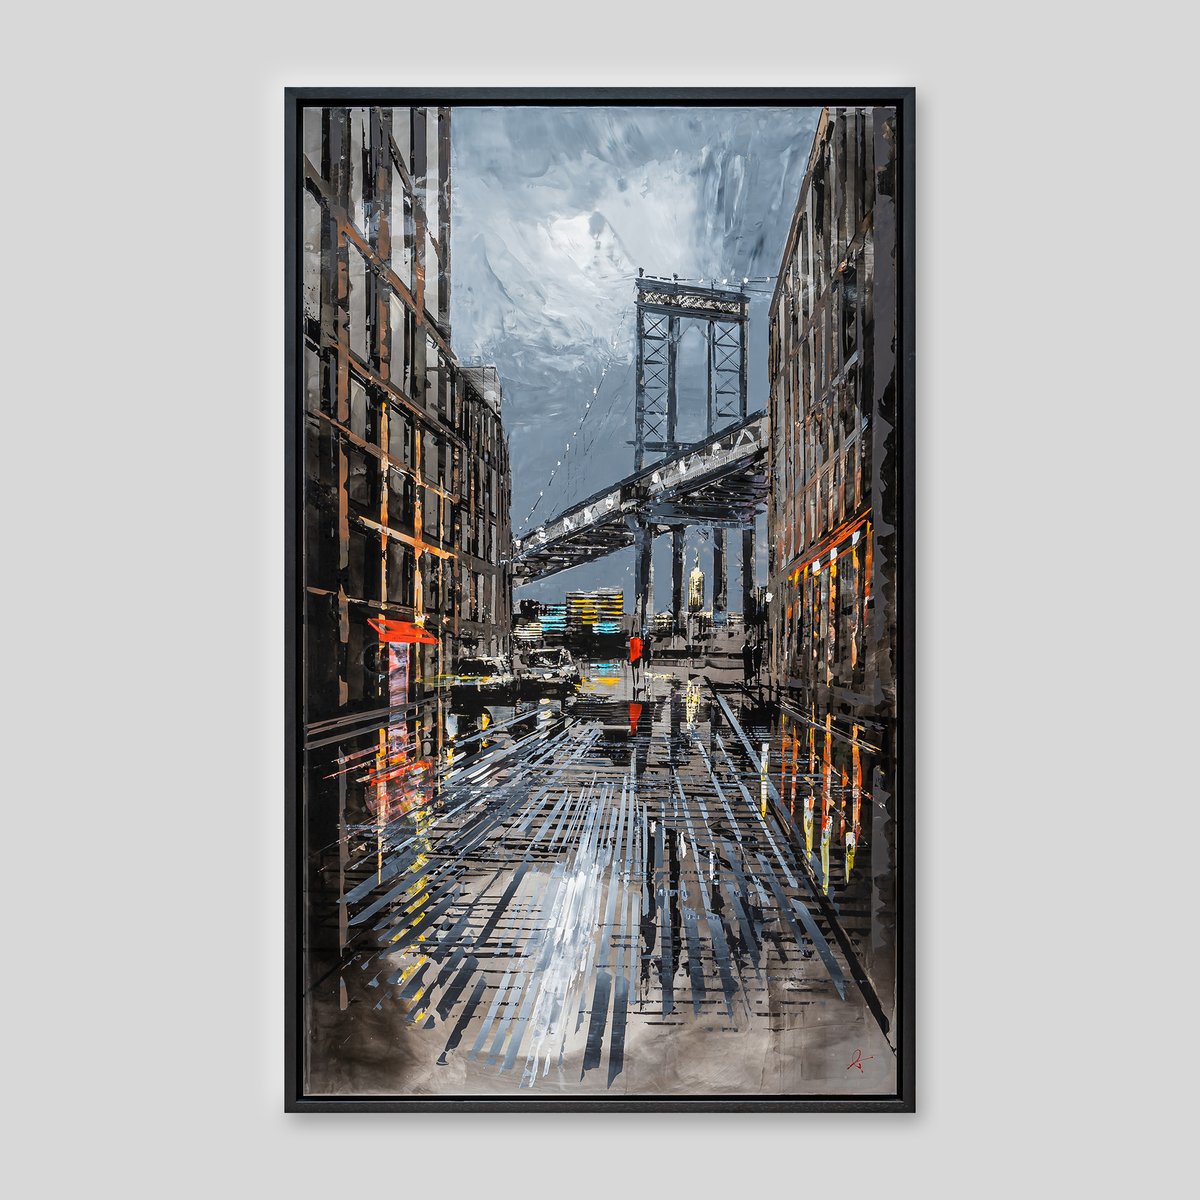 The iconic Manhattan Bridge is captured in “Brooklyn Nights” – a 36” x 60” resined mixed media painting on aluminium sheet. 
Available at paulkenton.com/gallery/brookl…
#paulkenton #painting #resin #oilpainting #cityscape #newyork #nycart #artist